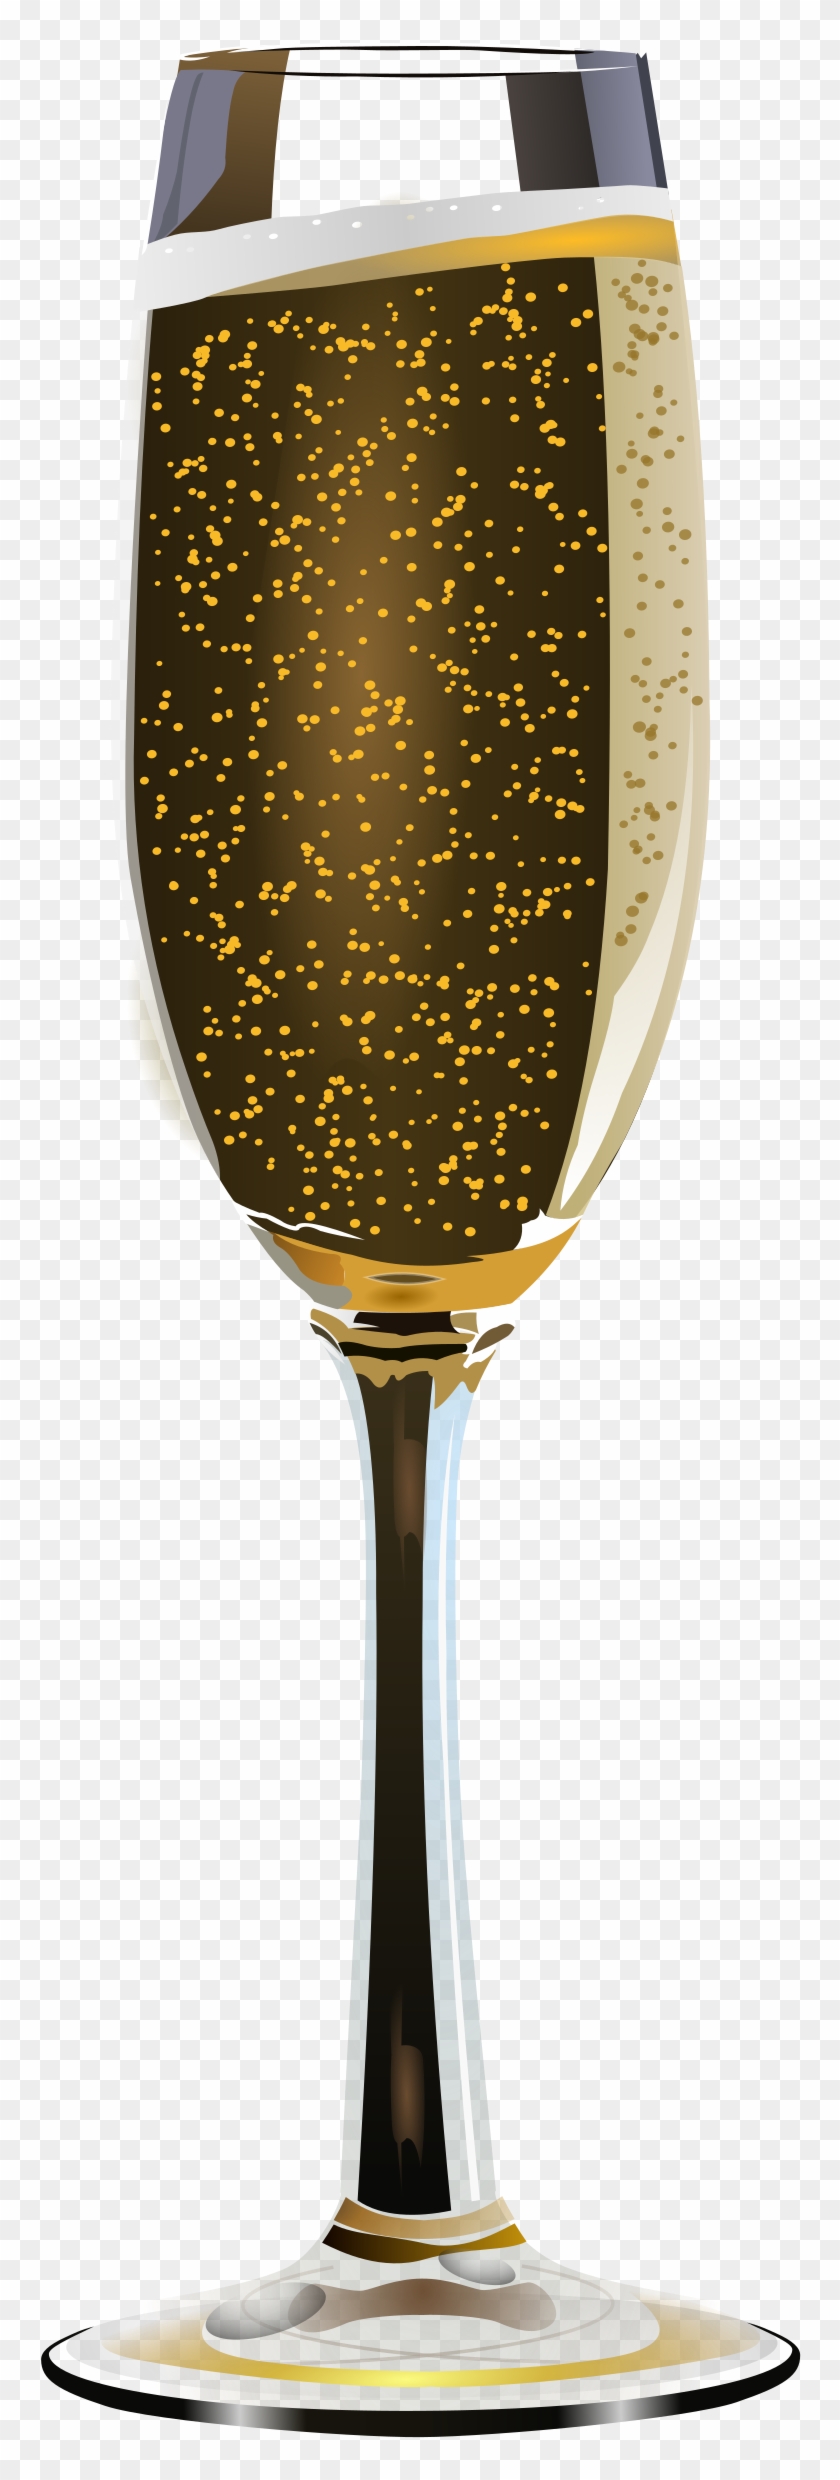 Champagne Glasses Png Clipart #183568